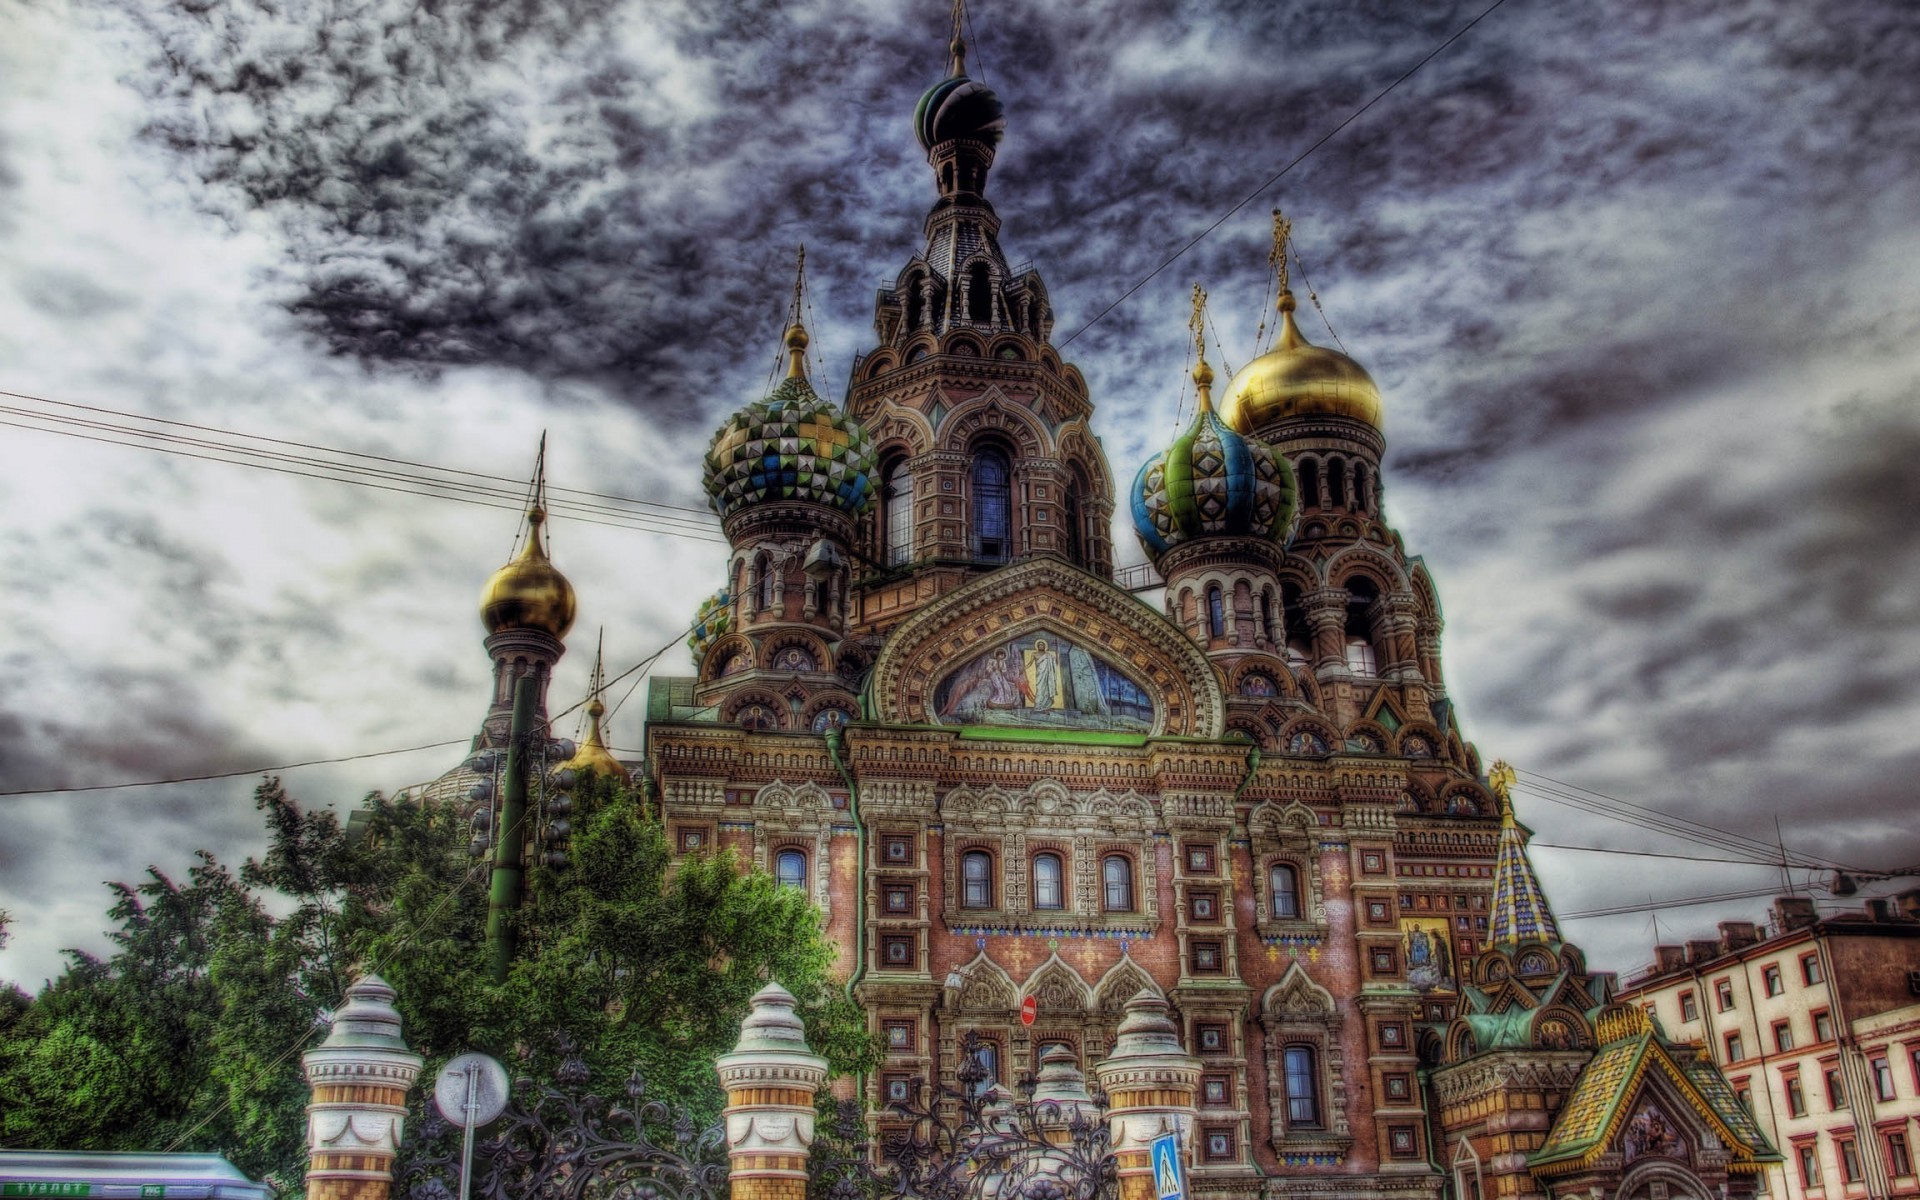 religious, church of the savior on blood, architecture, cathedral, church, colors, dome, hdr, man made, photography, russia, saint petersburg, cathedrals